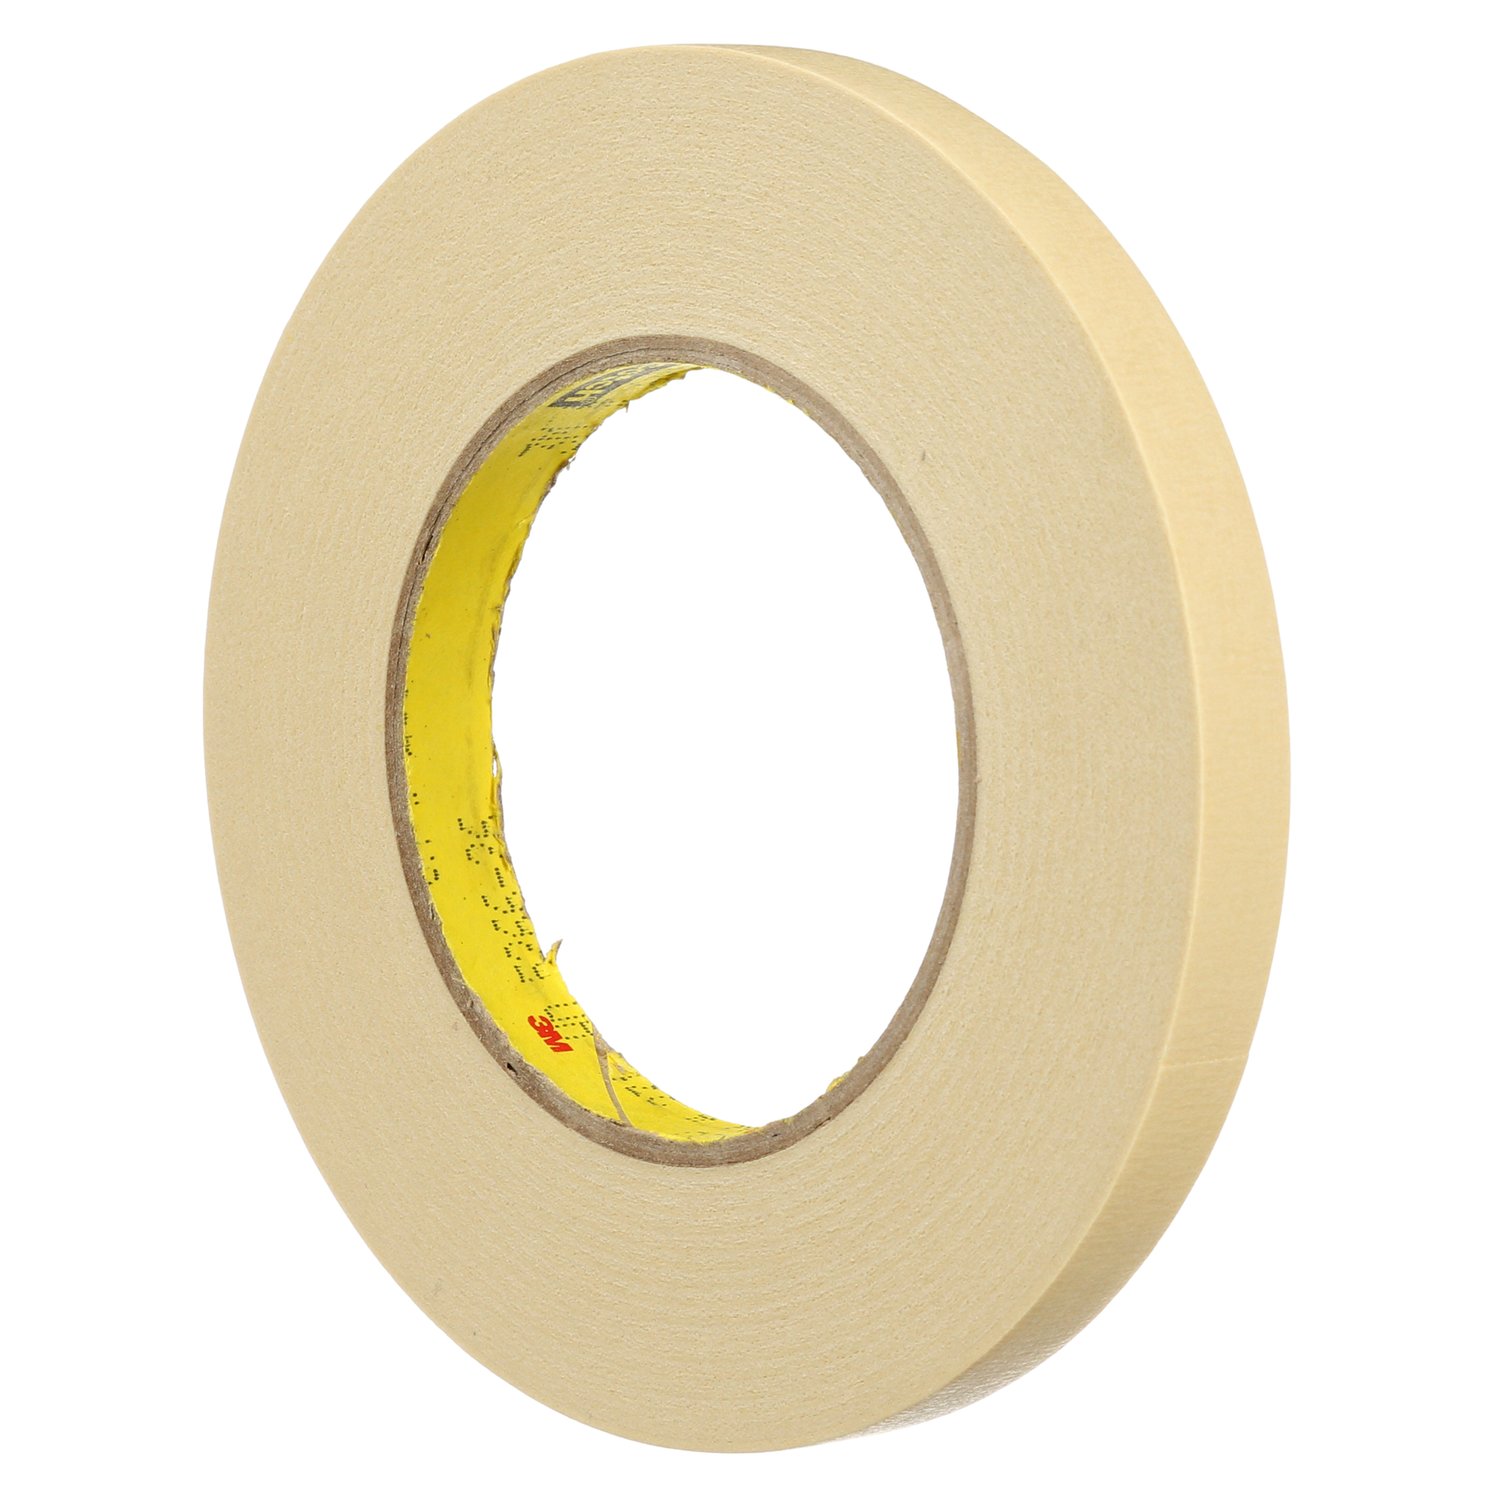 3M 165 Color Code Tape, 3/4'' x 60', Yellow